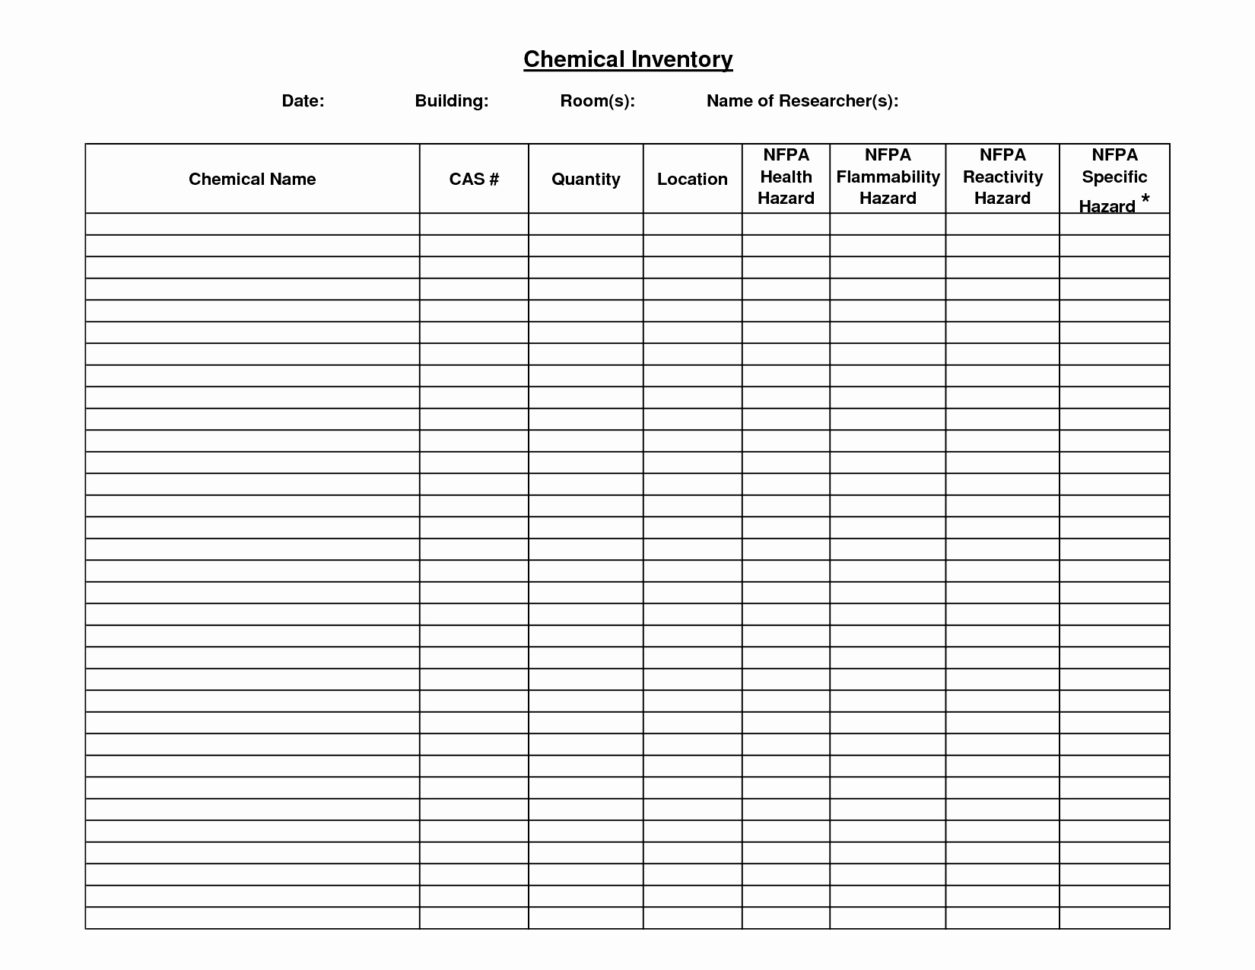 Blank Inventory Sheets Printable New Blank Inventory Spreadsheet In